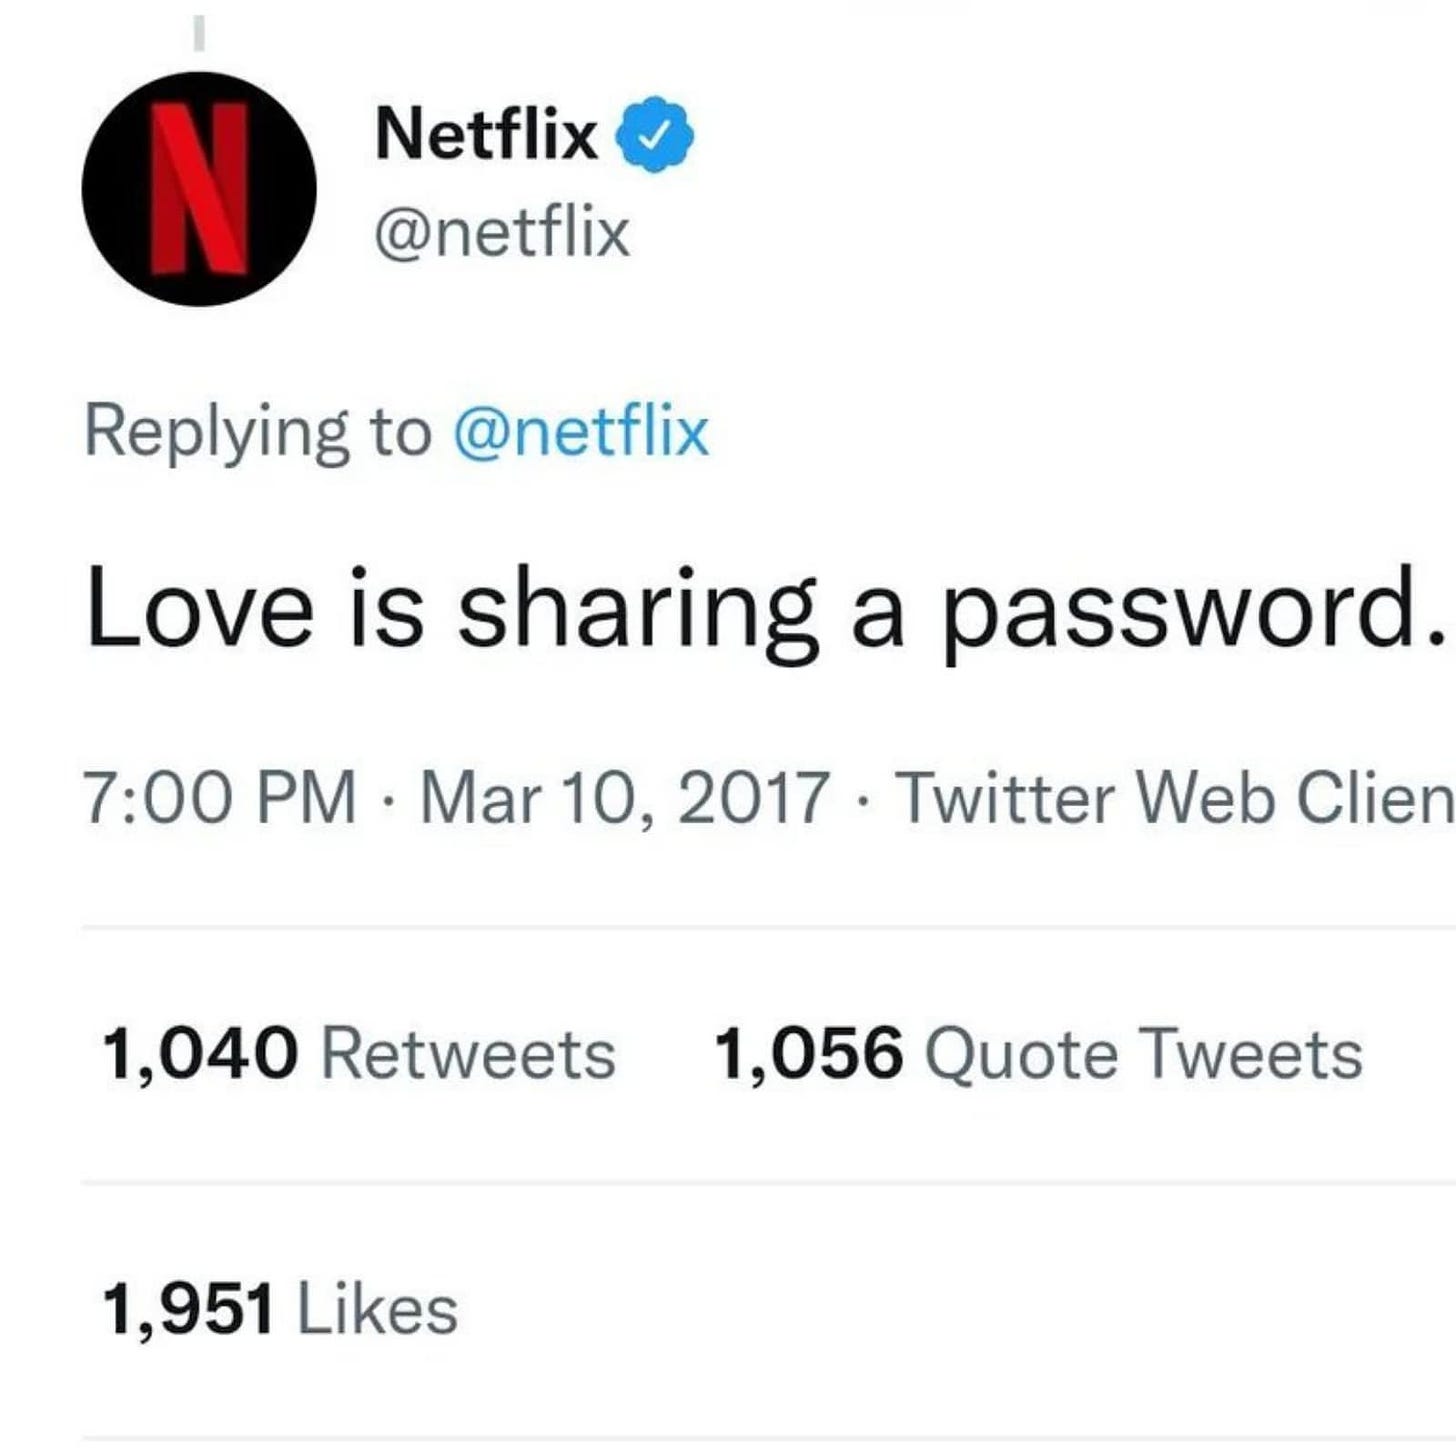 Netflix Gets Roasted for 'Poorly Aged' Tweet Claiming 'Love is Sharing a  Password'